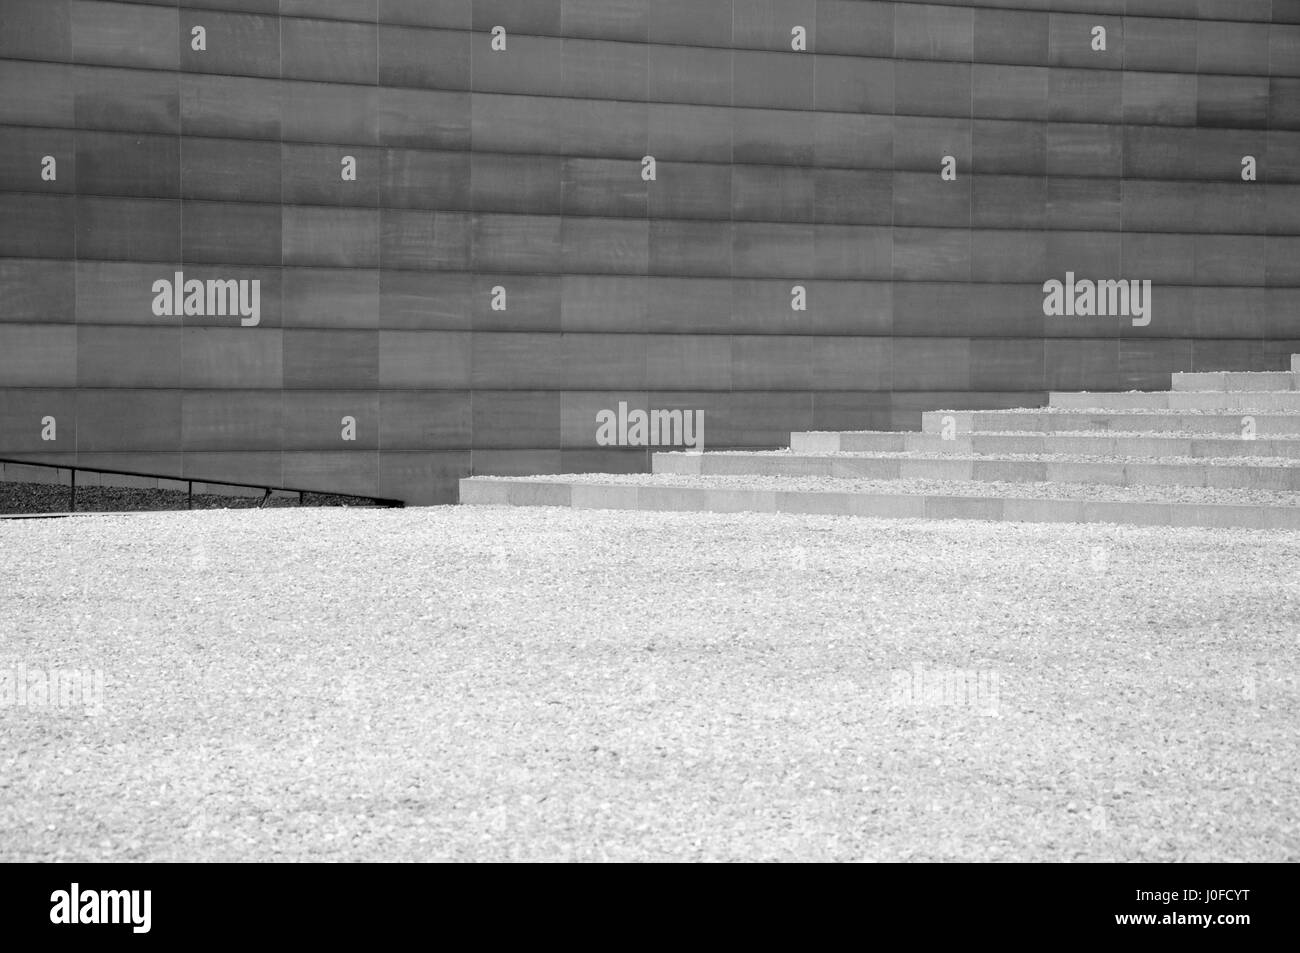 An abstract background black and white image of bricks and steps in Nanjing China at the Nanjing Massacre site museum. Stock Photo